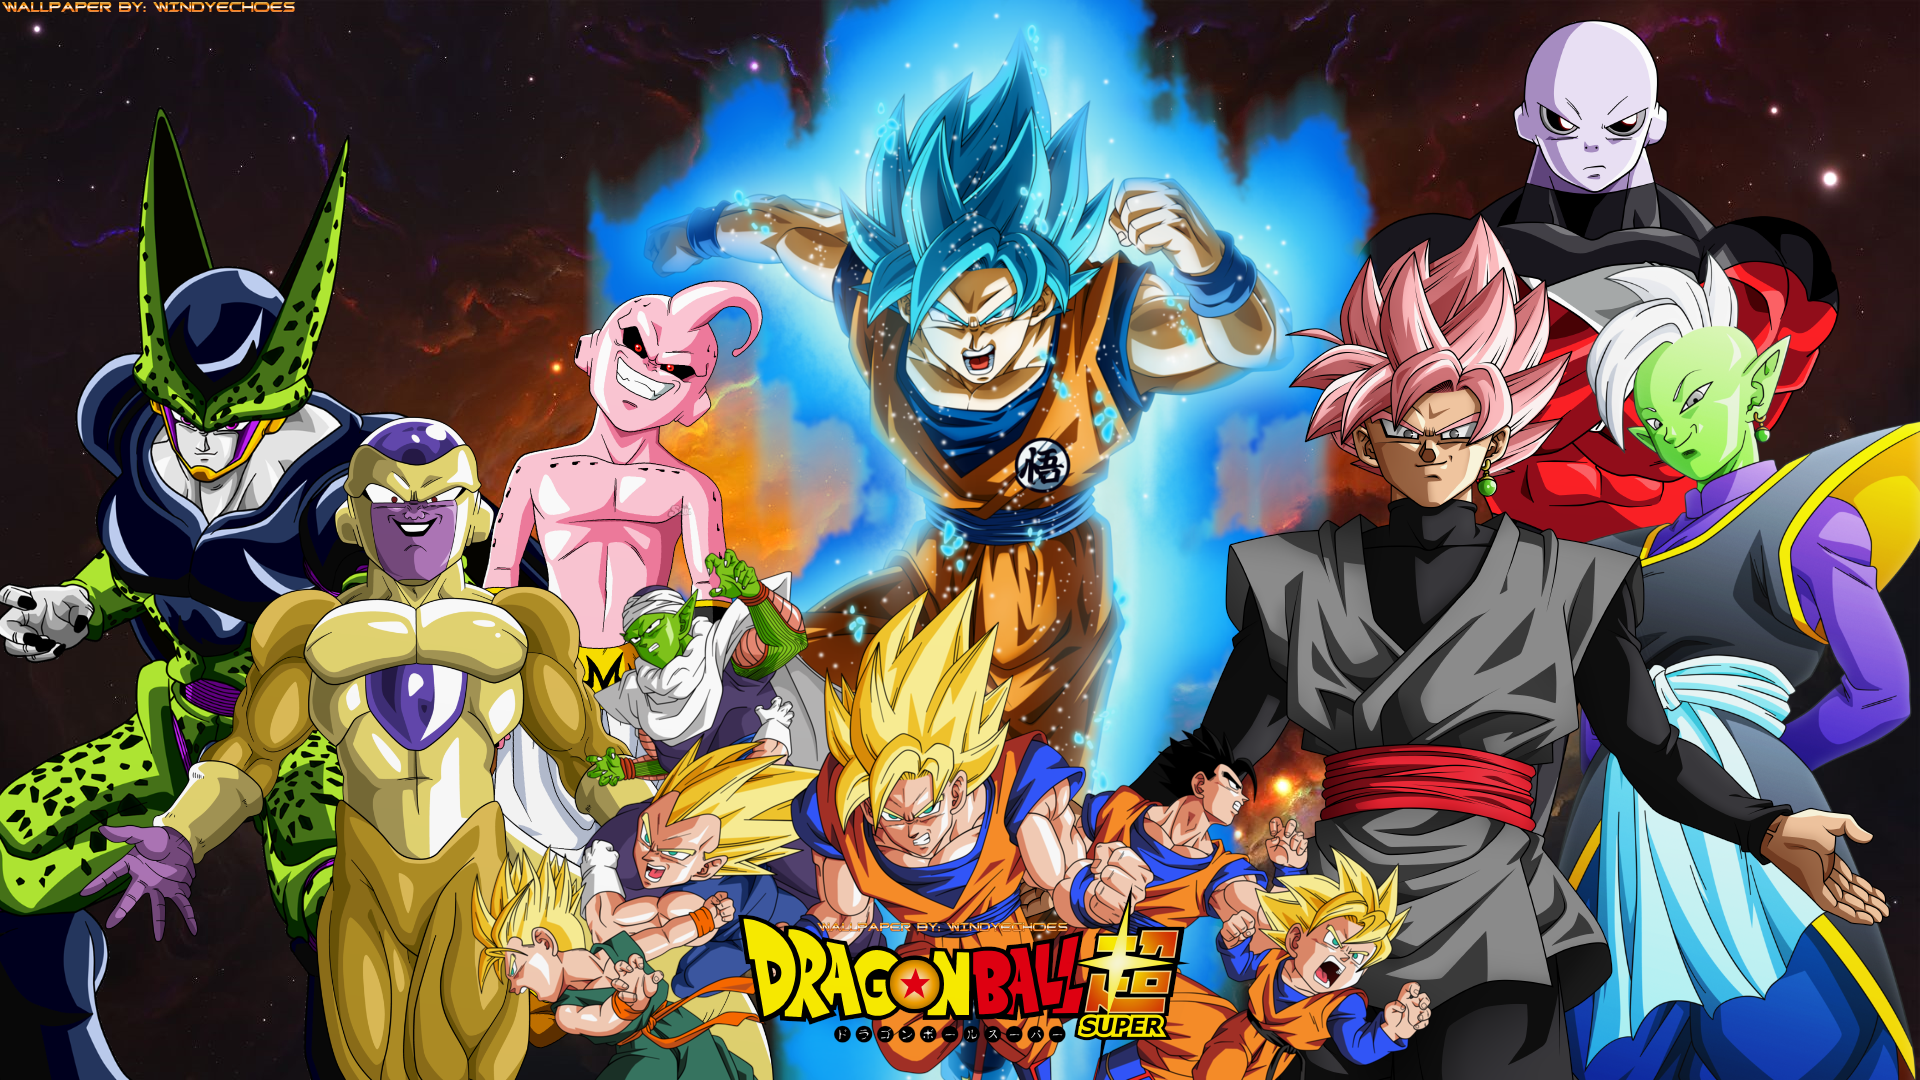 DRAGON BALL SUPER WALLPAPER ULTIMATE GROUP by WindyEchoes on DeviantArt